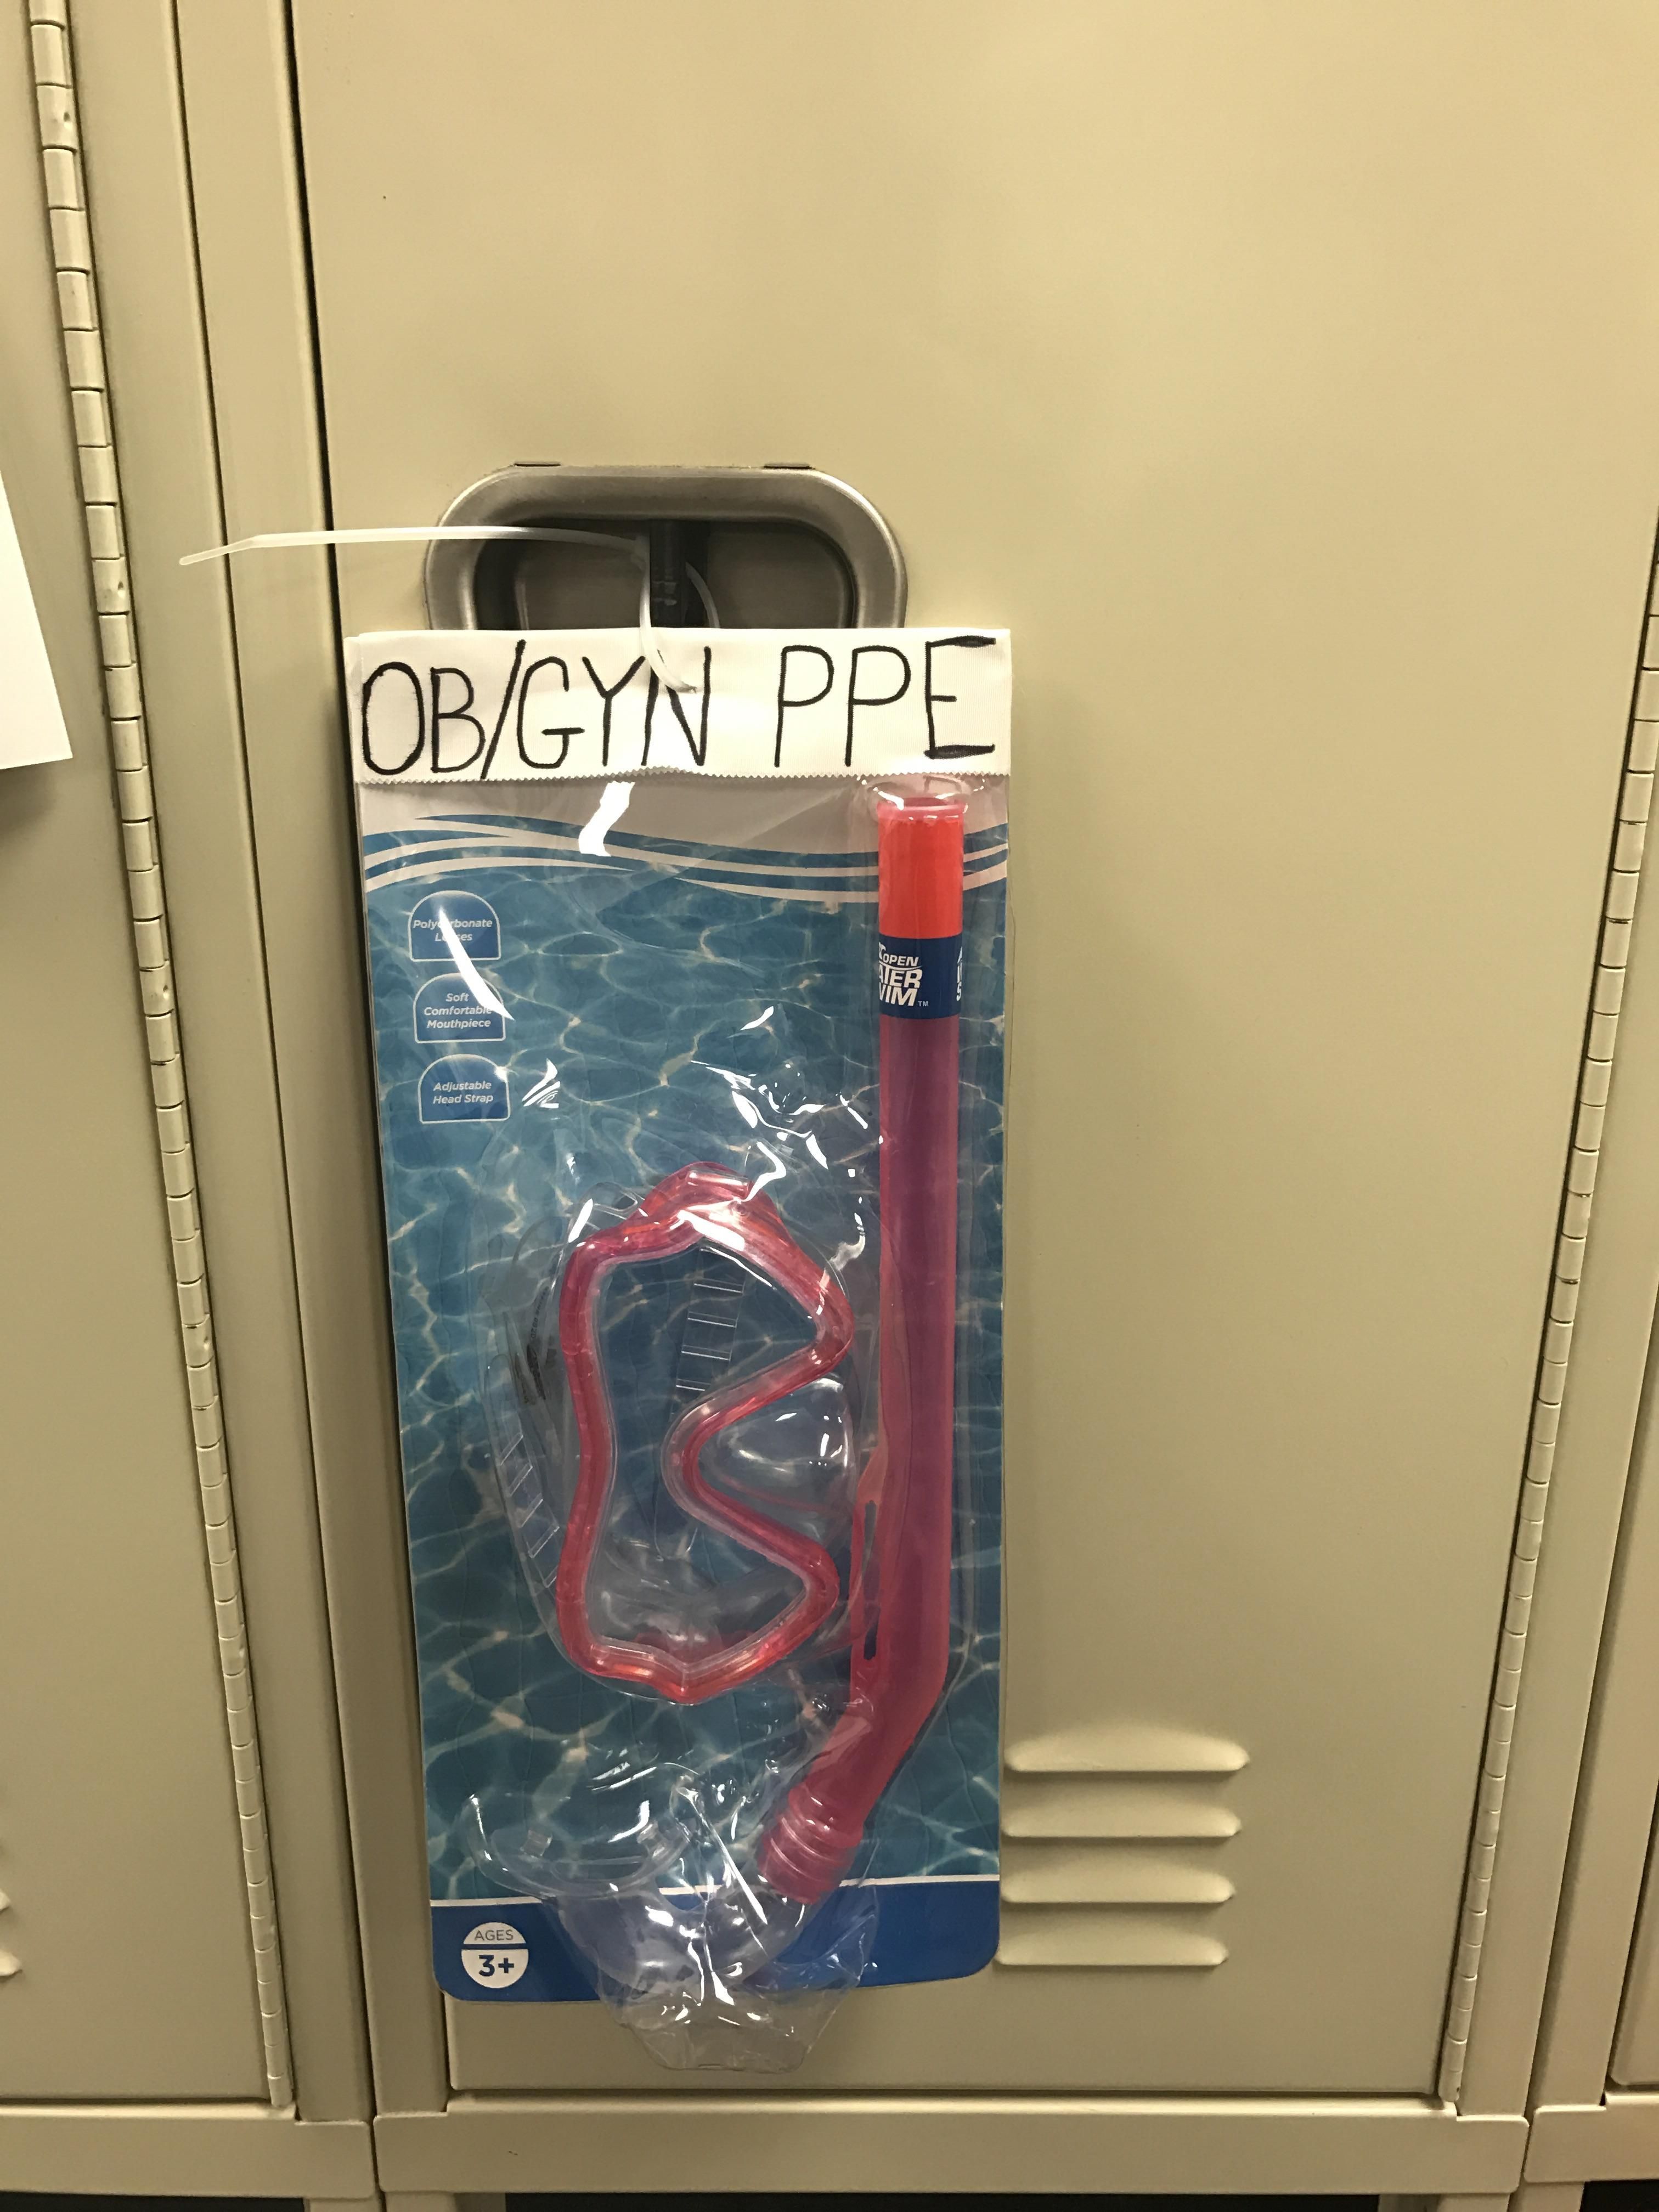 I'm an EMT. After a very wet, very messy birth call, I went home to change clothes. Came back to this on my locker.